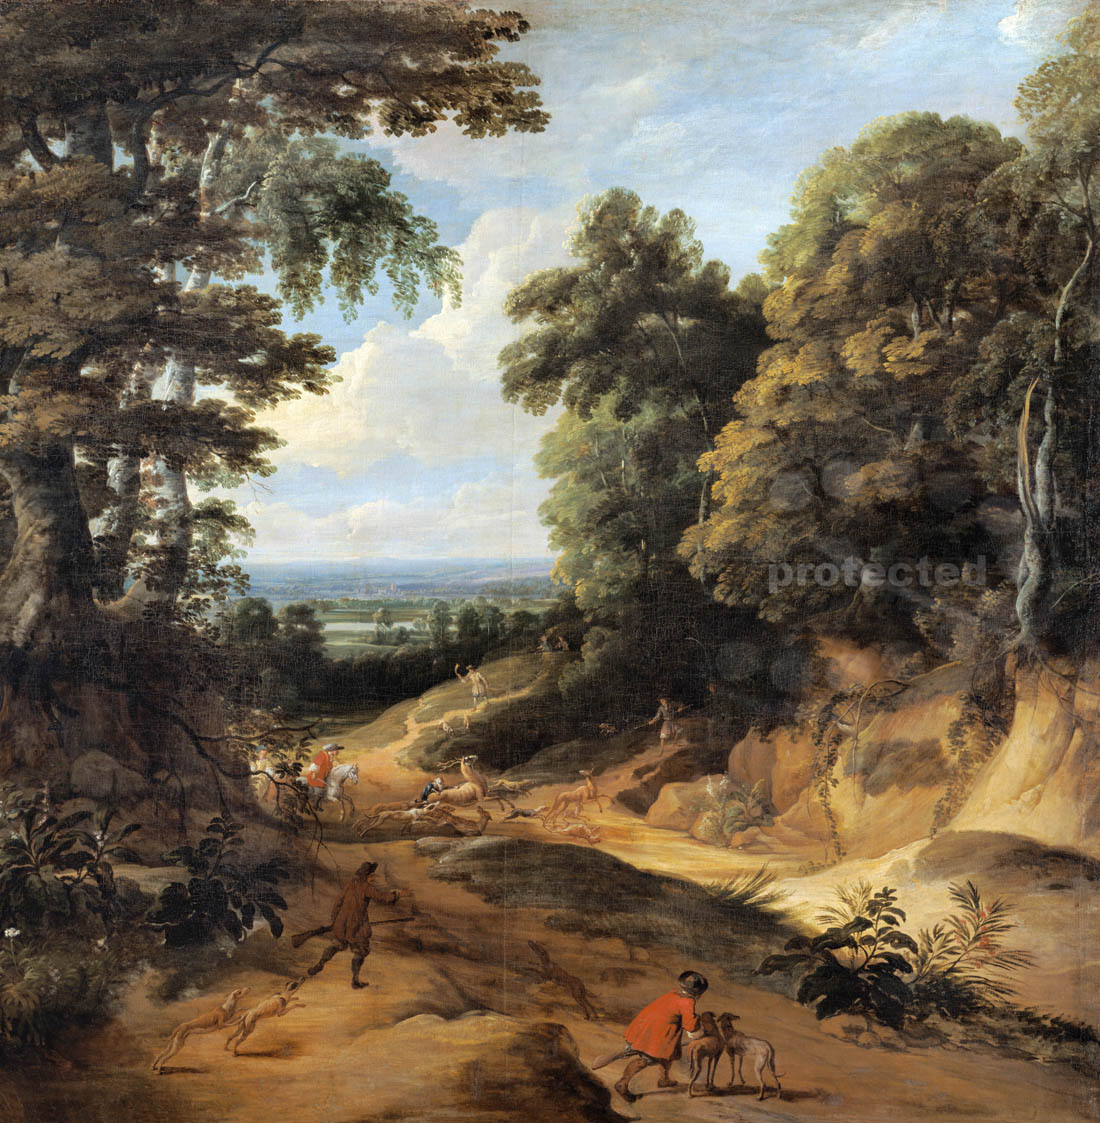 Landscape with tall trees from Jacques d'Arthois